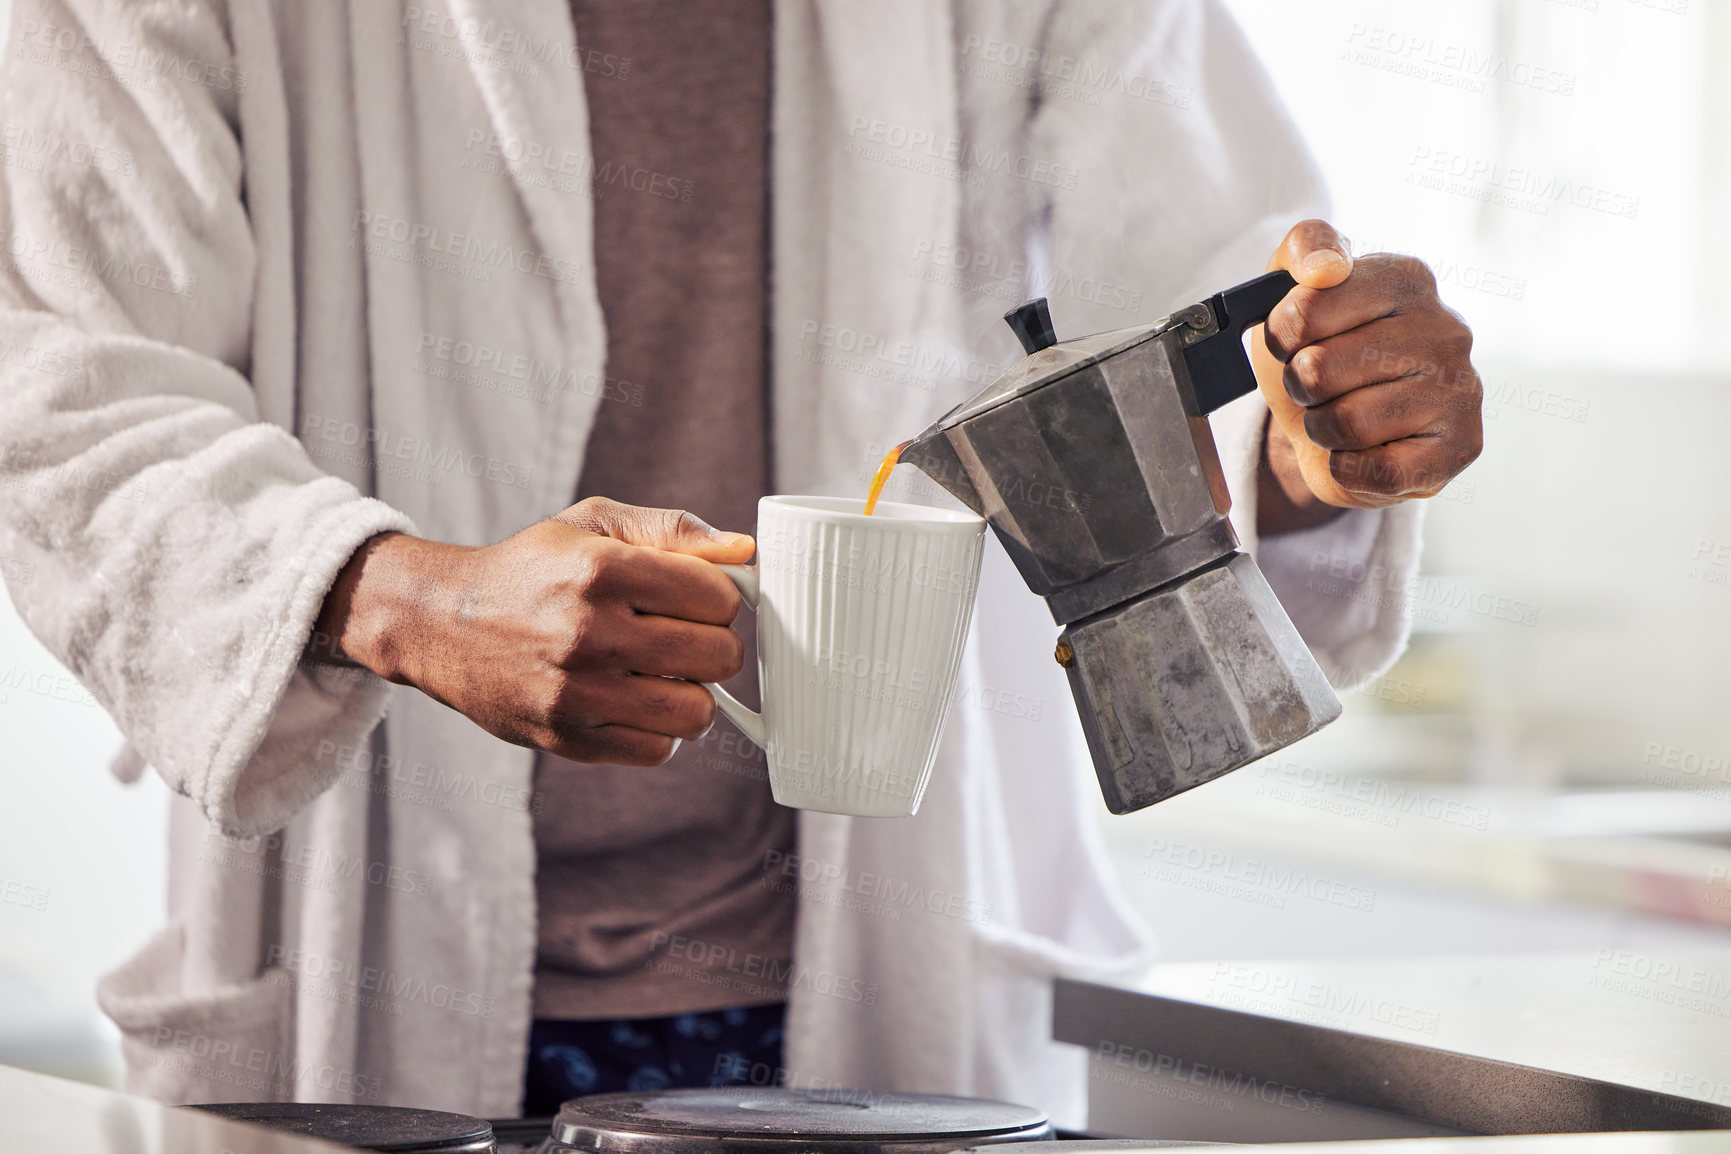 Buy stock photo Shot of an unrecognizable man pouring coffee into a cup at home